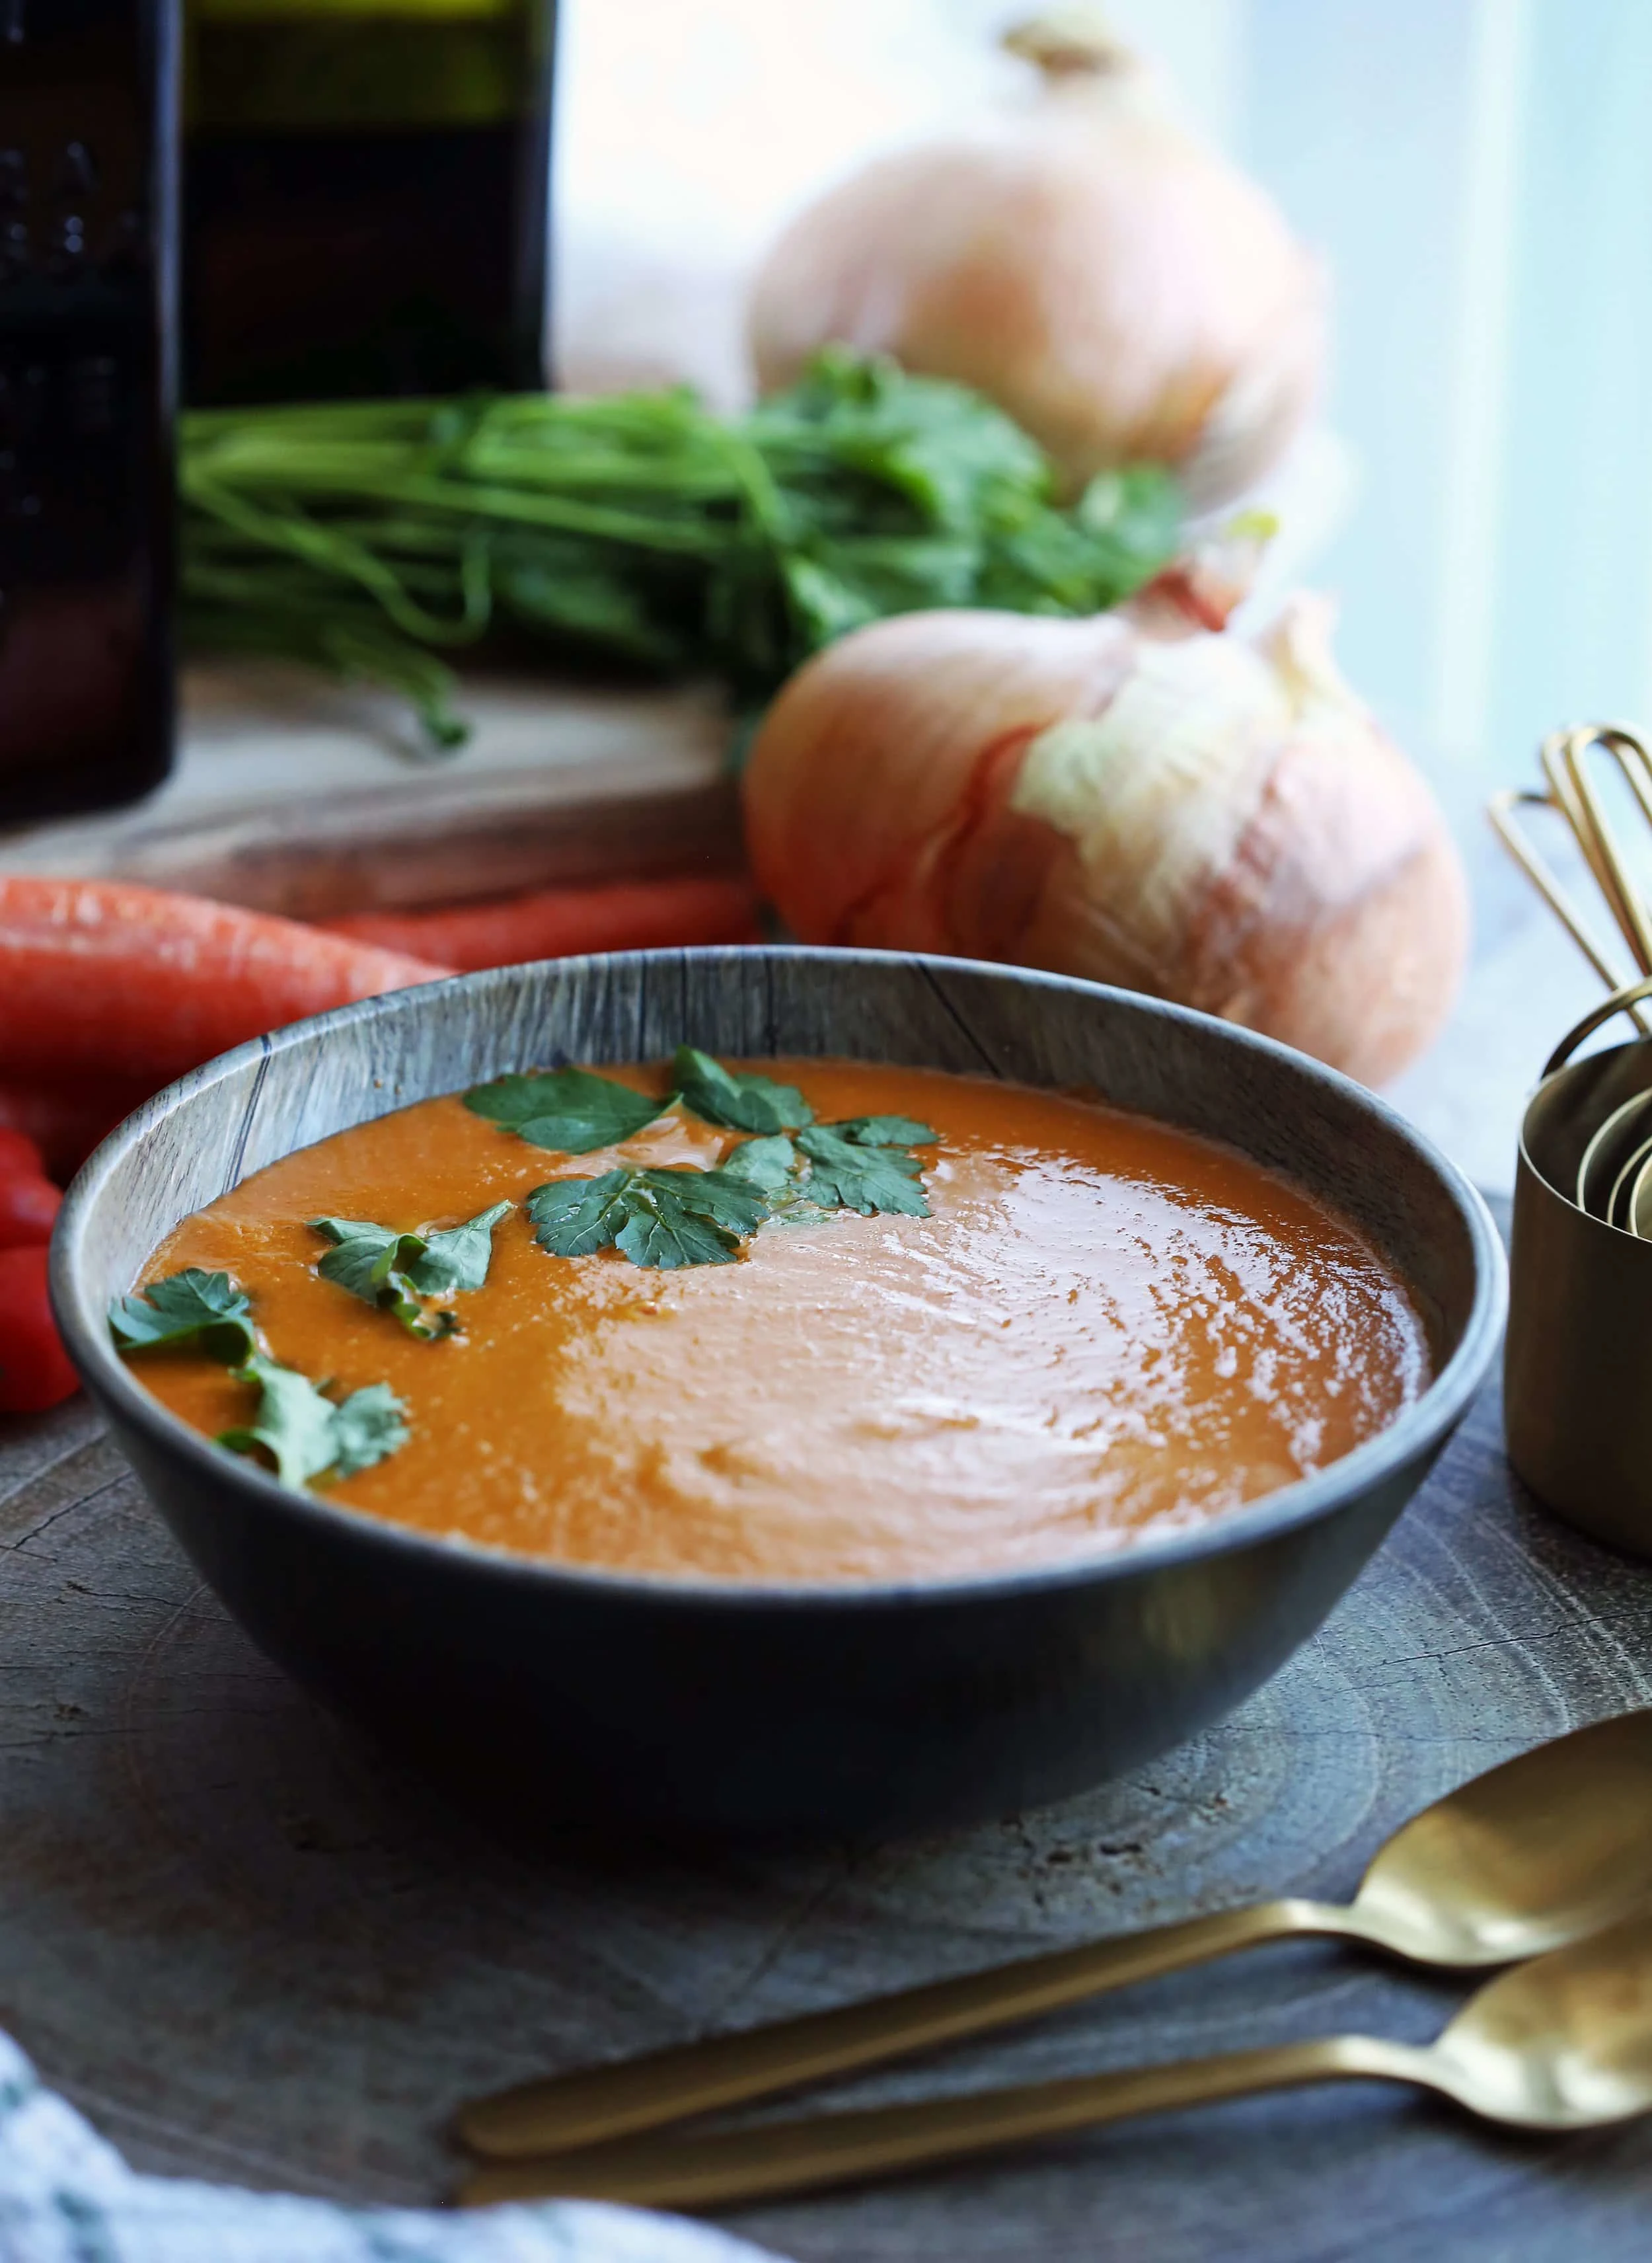 Homemade blended tomato soup that was made in the Instant Pot in a wooden bowl.